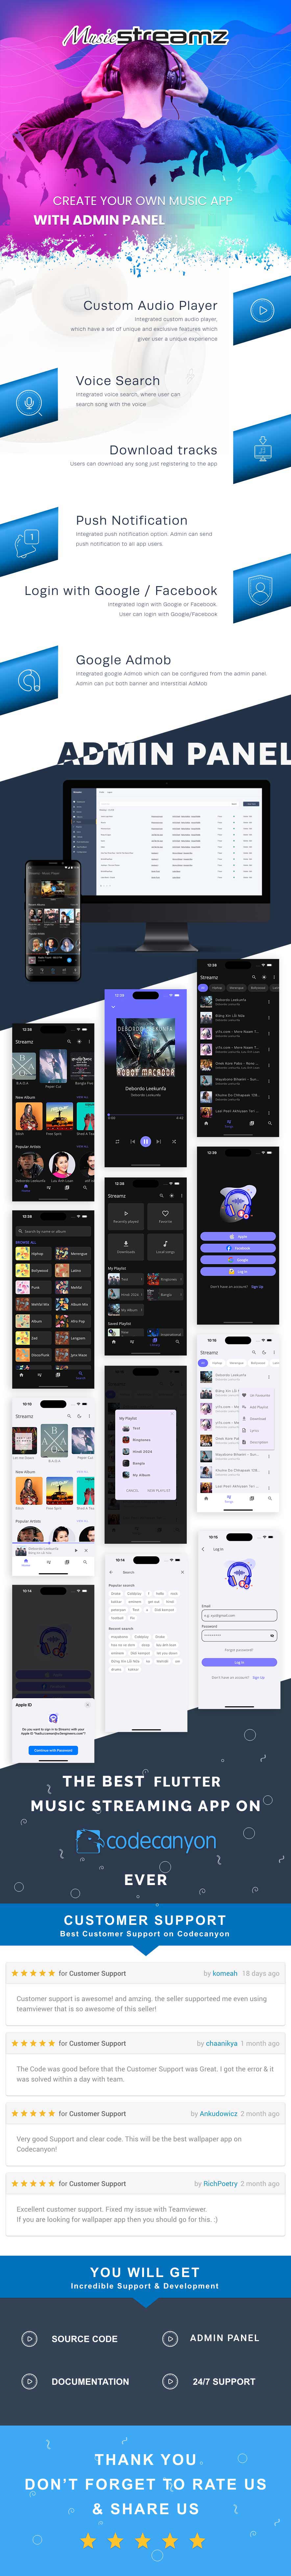 Streamz - A music streaming Flutter app with admin panel - 6